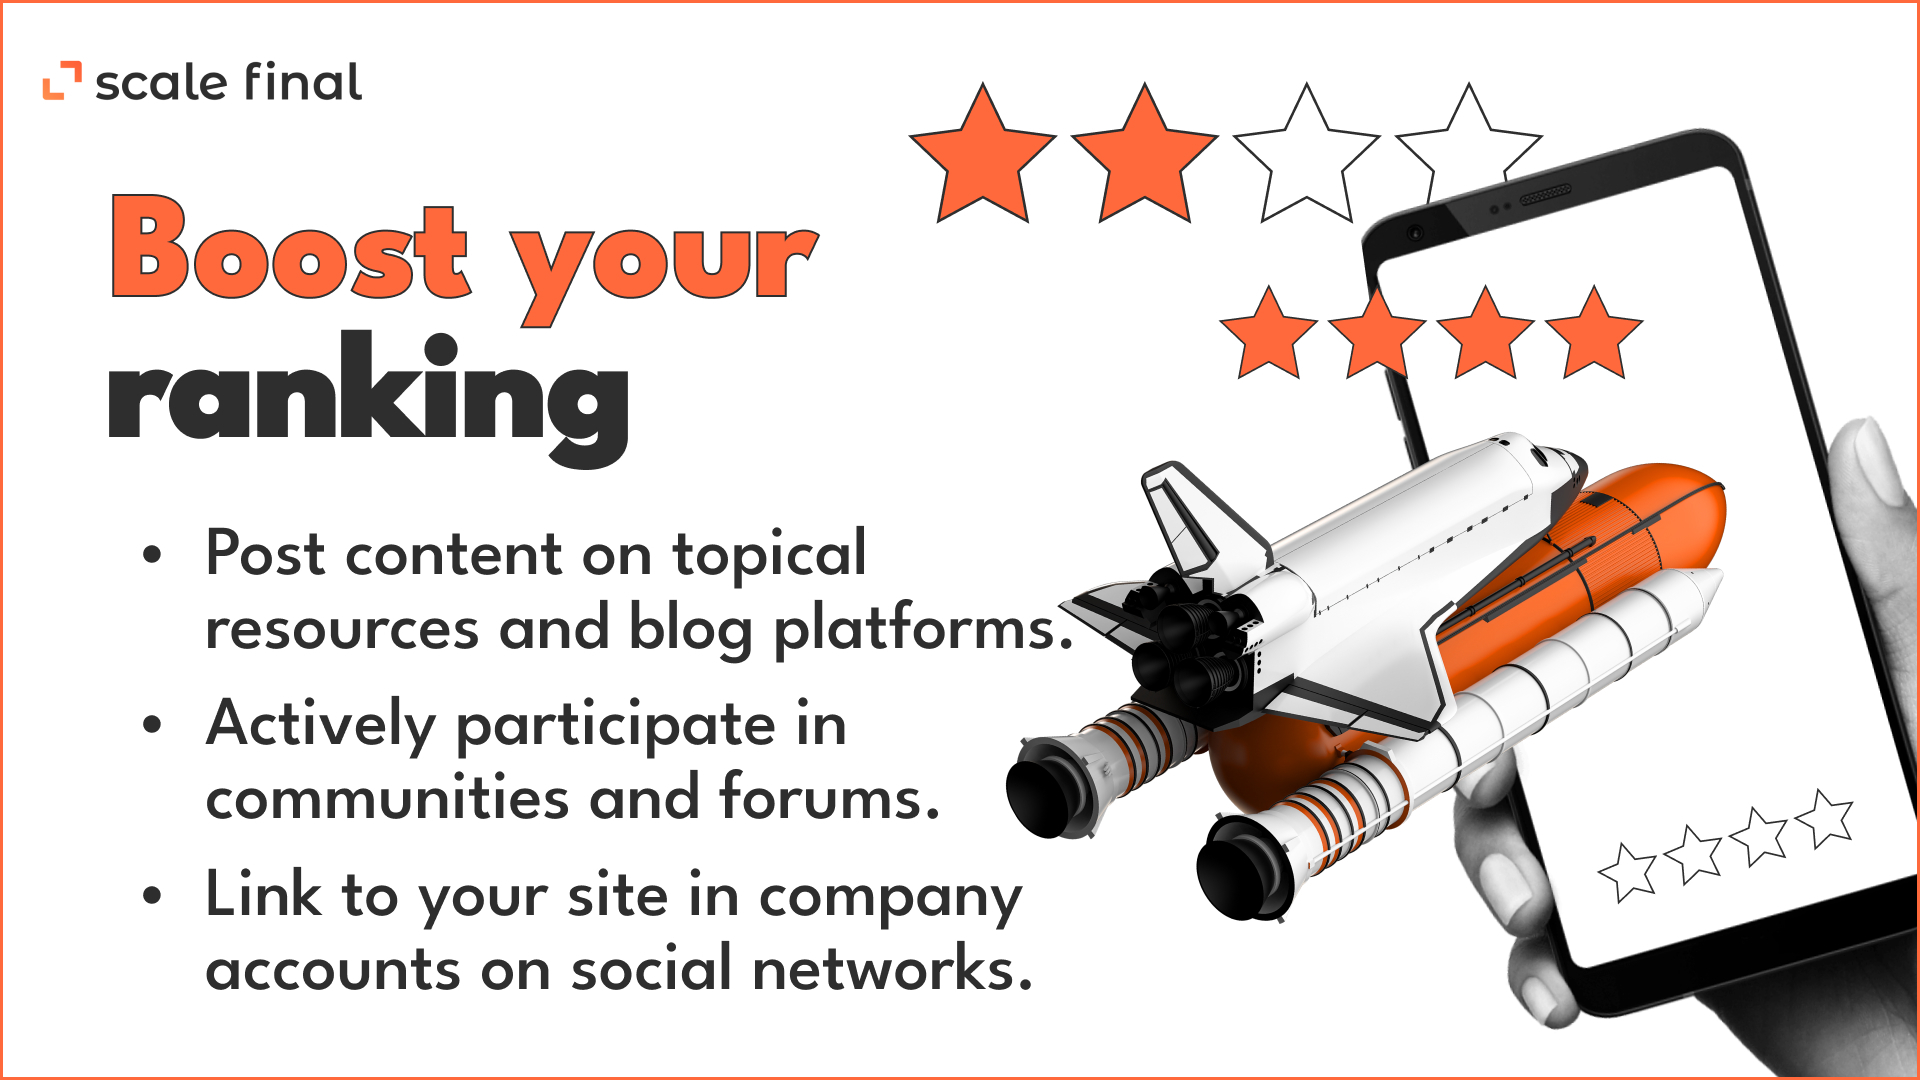 Boost your ranking: Post content on topical resources and blog platforms.Actively participate in communities and forums.Link to your site in company accounts on social networks.